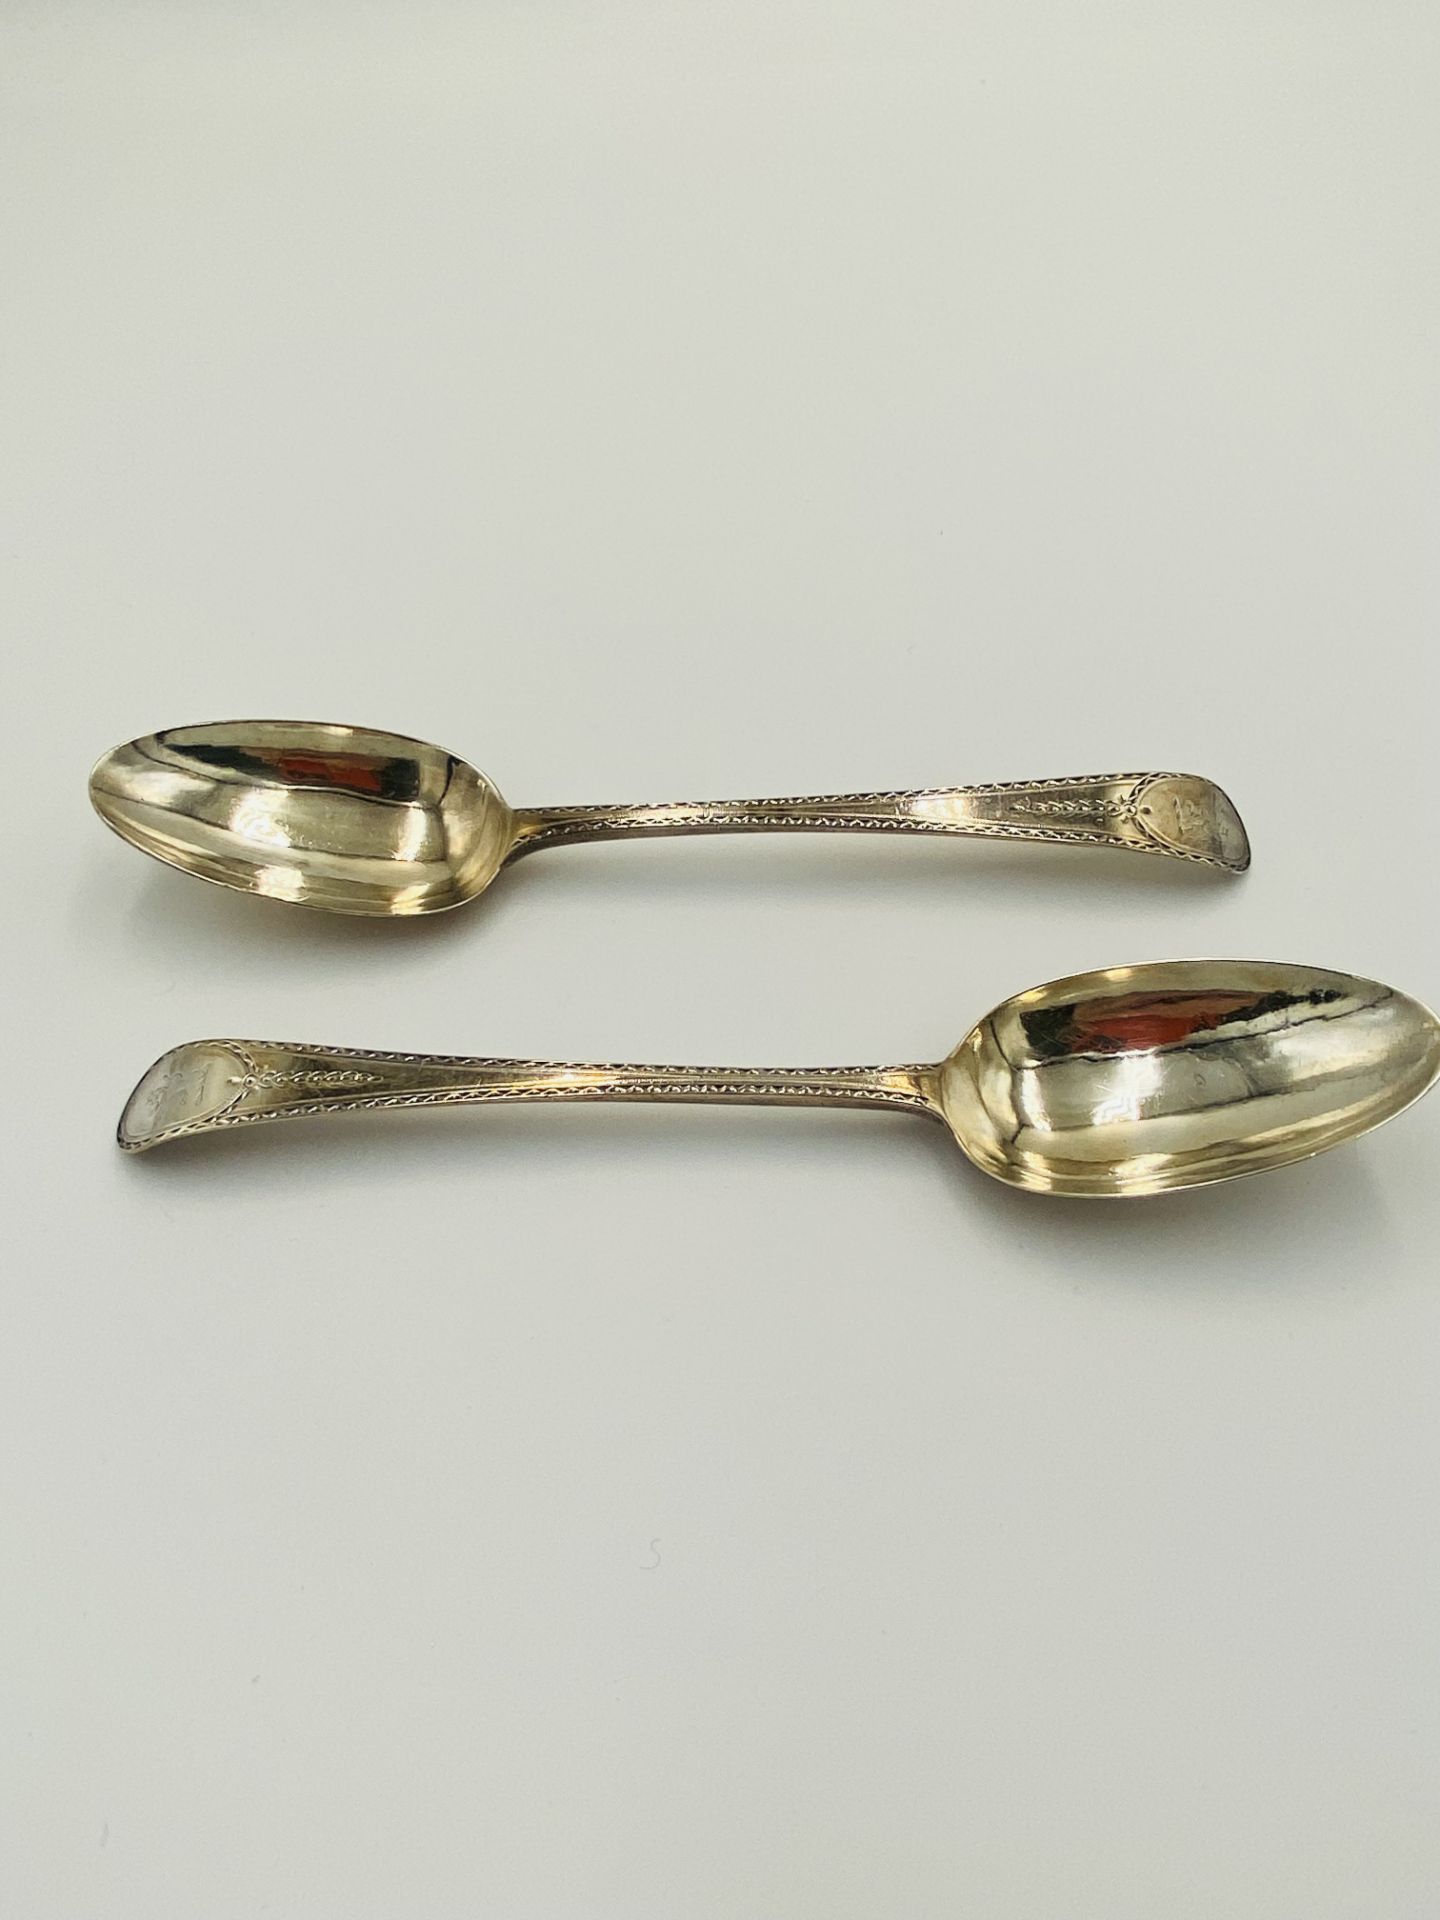 A pair of mid 18th century silver Old English pattern table spoons by Hester Bateman - Image 2 of 6